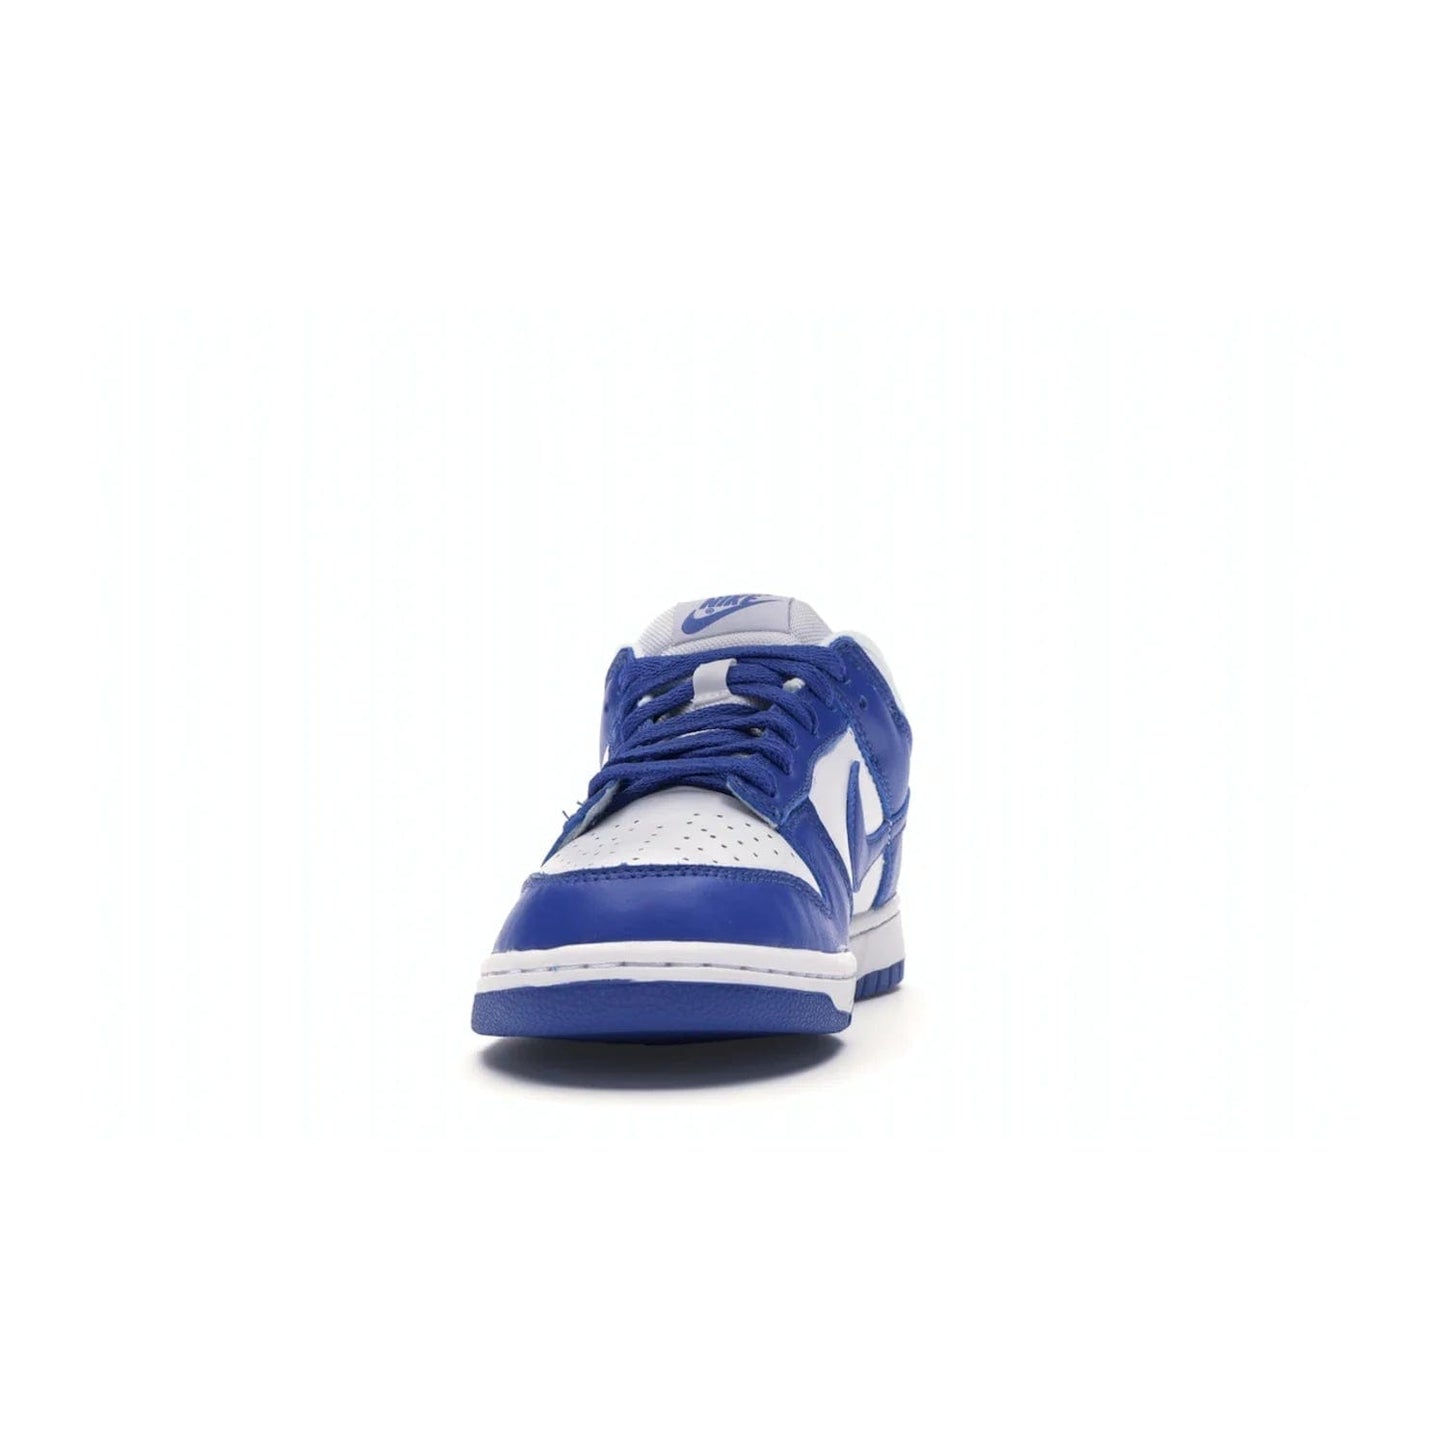 Nike Dunk Low SP Kentucky (2020/2022) - Image 11 - Only at www.BallersClubKickz.com - Classic Nike Dunk Low SP Kentucky with timeless White/Varsity Royal colorway. White leather upper, royal outsole, and Nike branding. A hit since March 2020 homage to the 1985 Nike College Colors program. Show your support with these classic kicks.